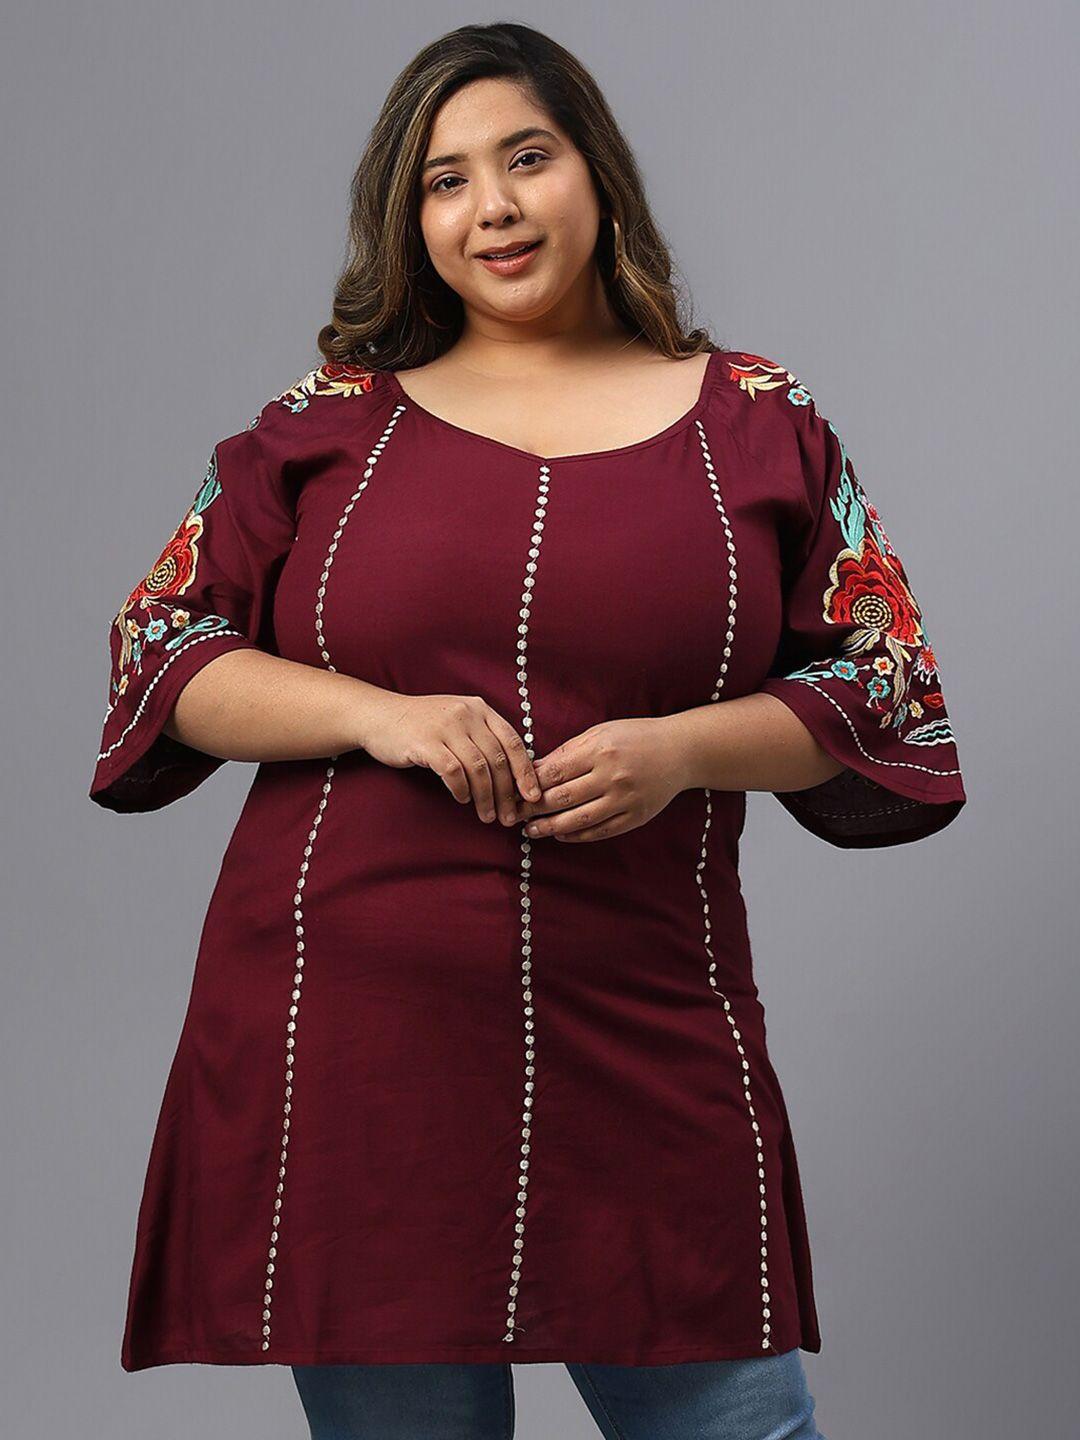 saakaa-plus-size-floral-embroidery-cotton-regular-top